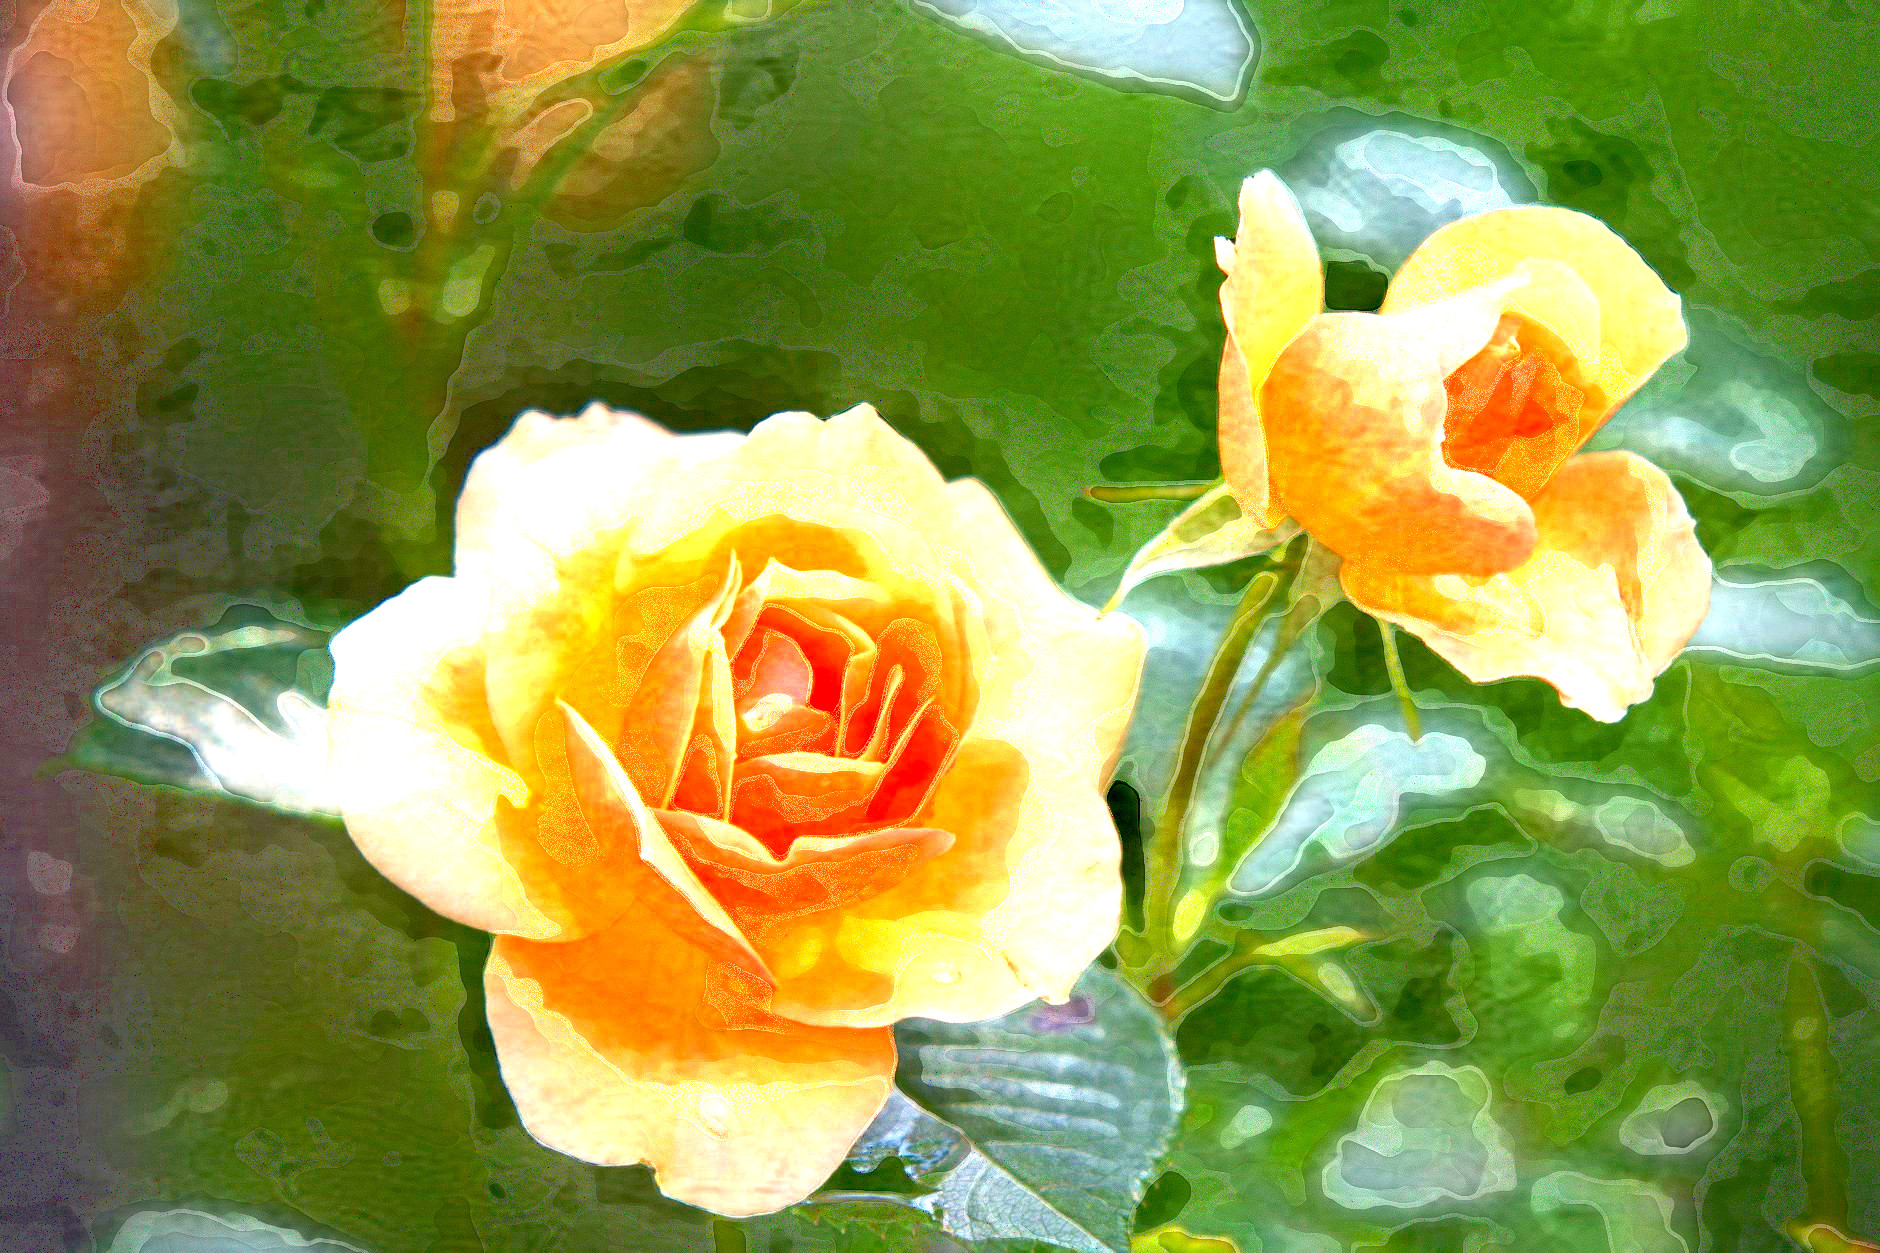 2020-02-25 15-48-36rose-flower-blossom-bloom-39517 with a watercolour effect.jpg